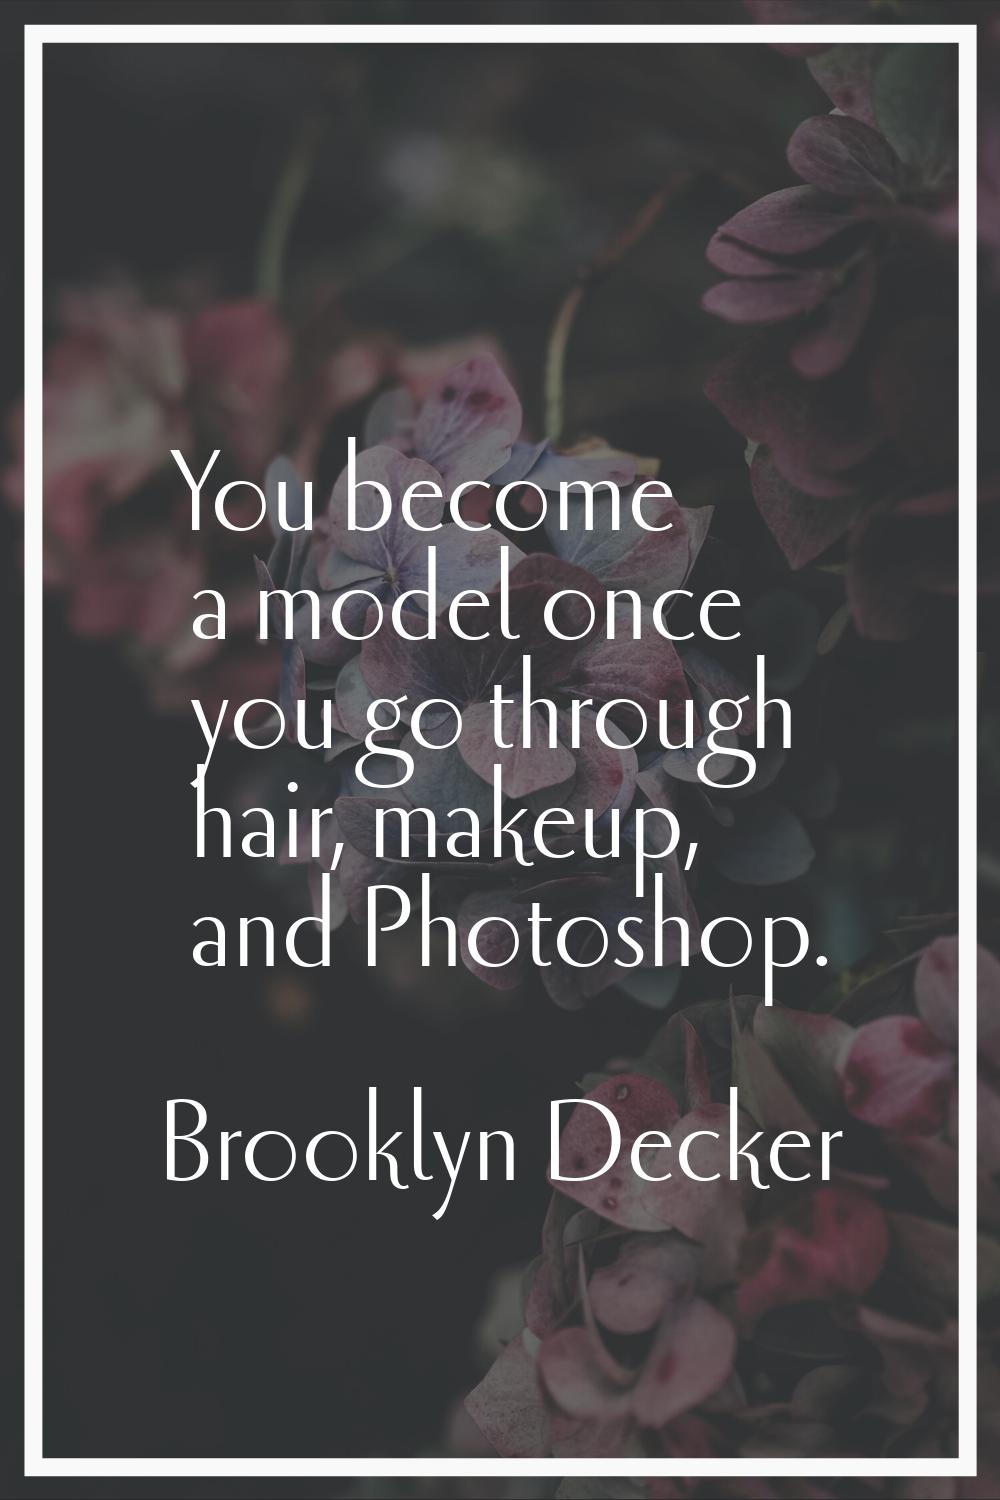 You become a model once you go through hair, makeup, and Photoshop.